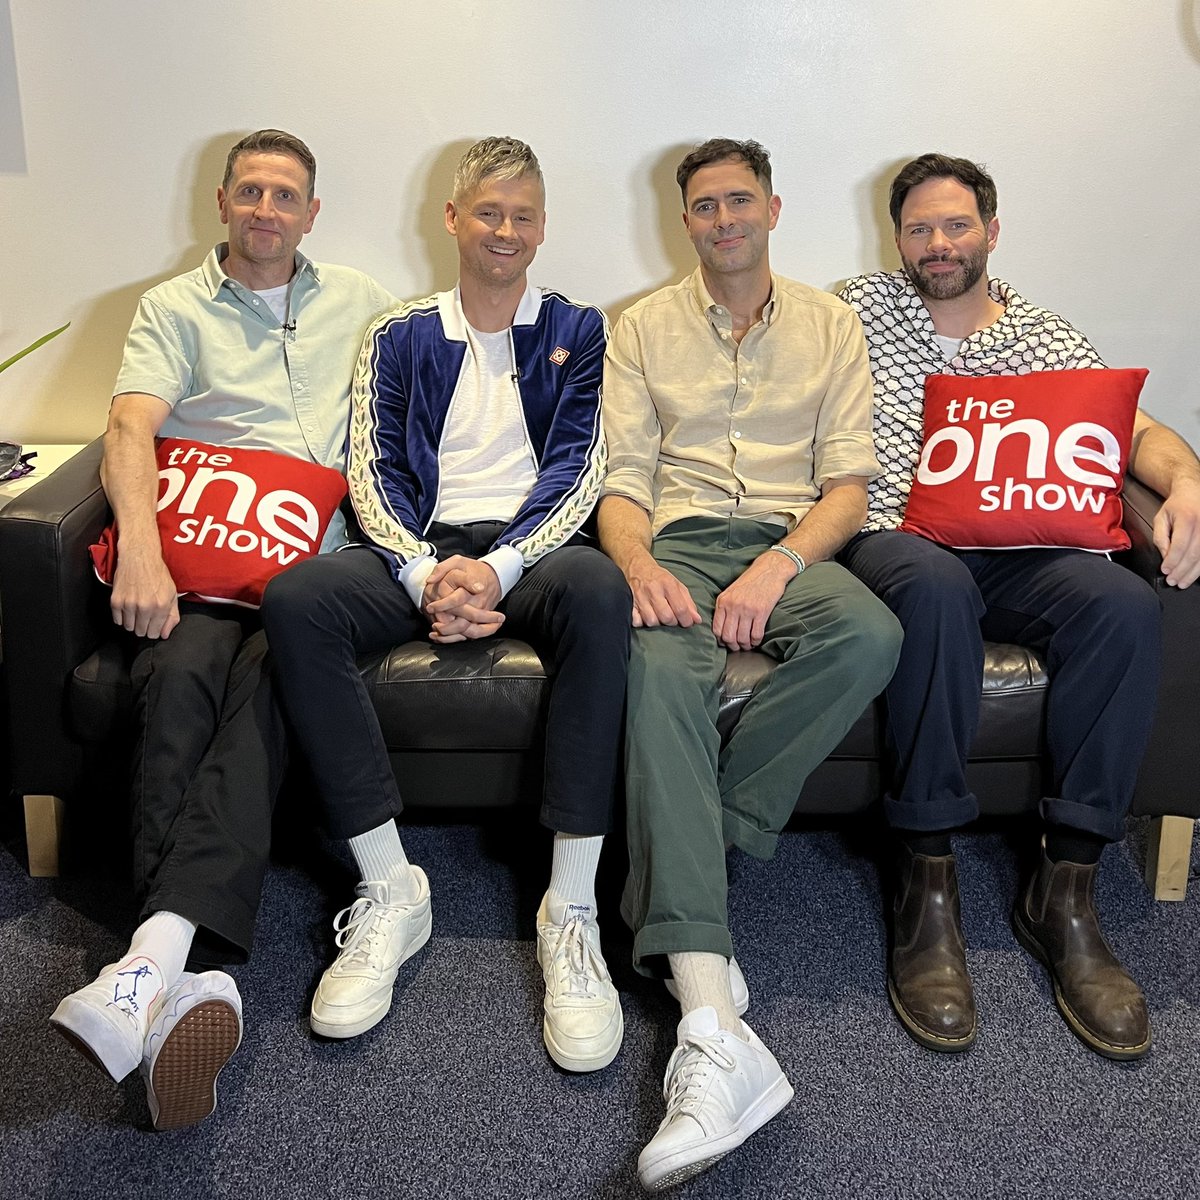 Keane are ready for a special live performance on #TheOneShow! 🎶   Watch here from 7pm 👉 bbc.in/3yoLJ9Y